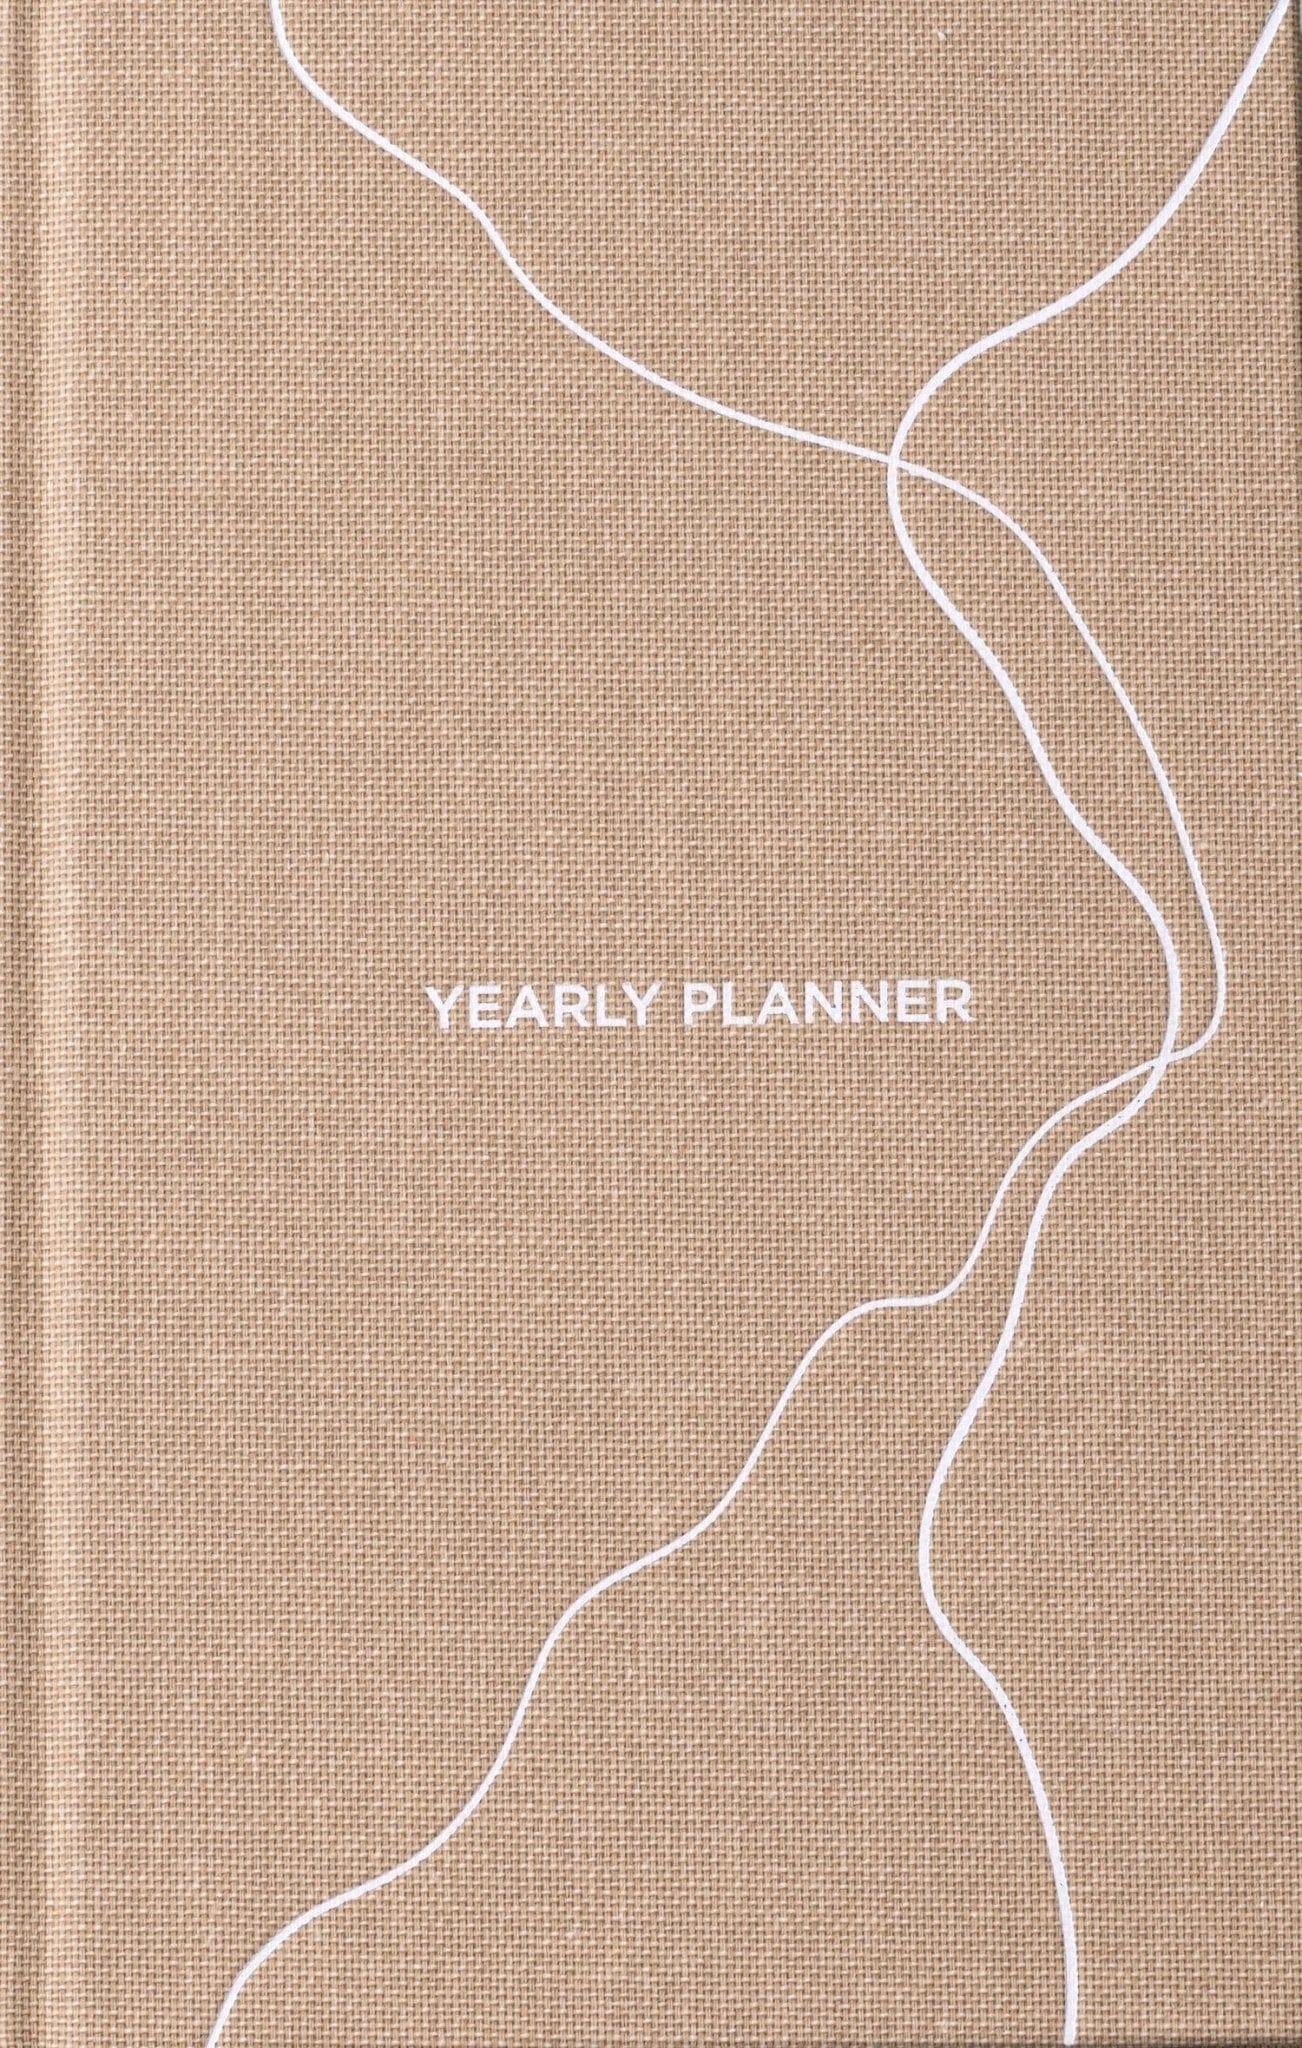 NewMags Agenda Yearly Planner (Sand), Atelier Aarhus, in Limba Engleza